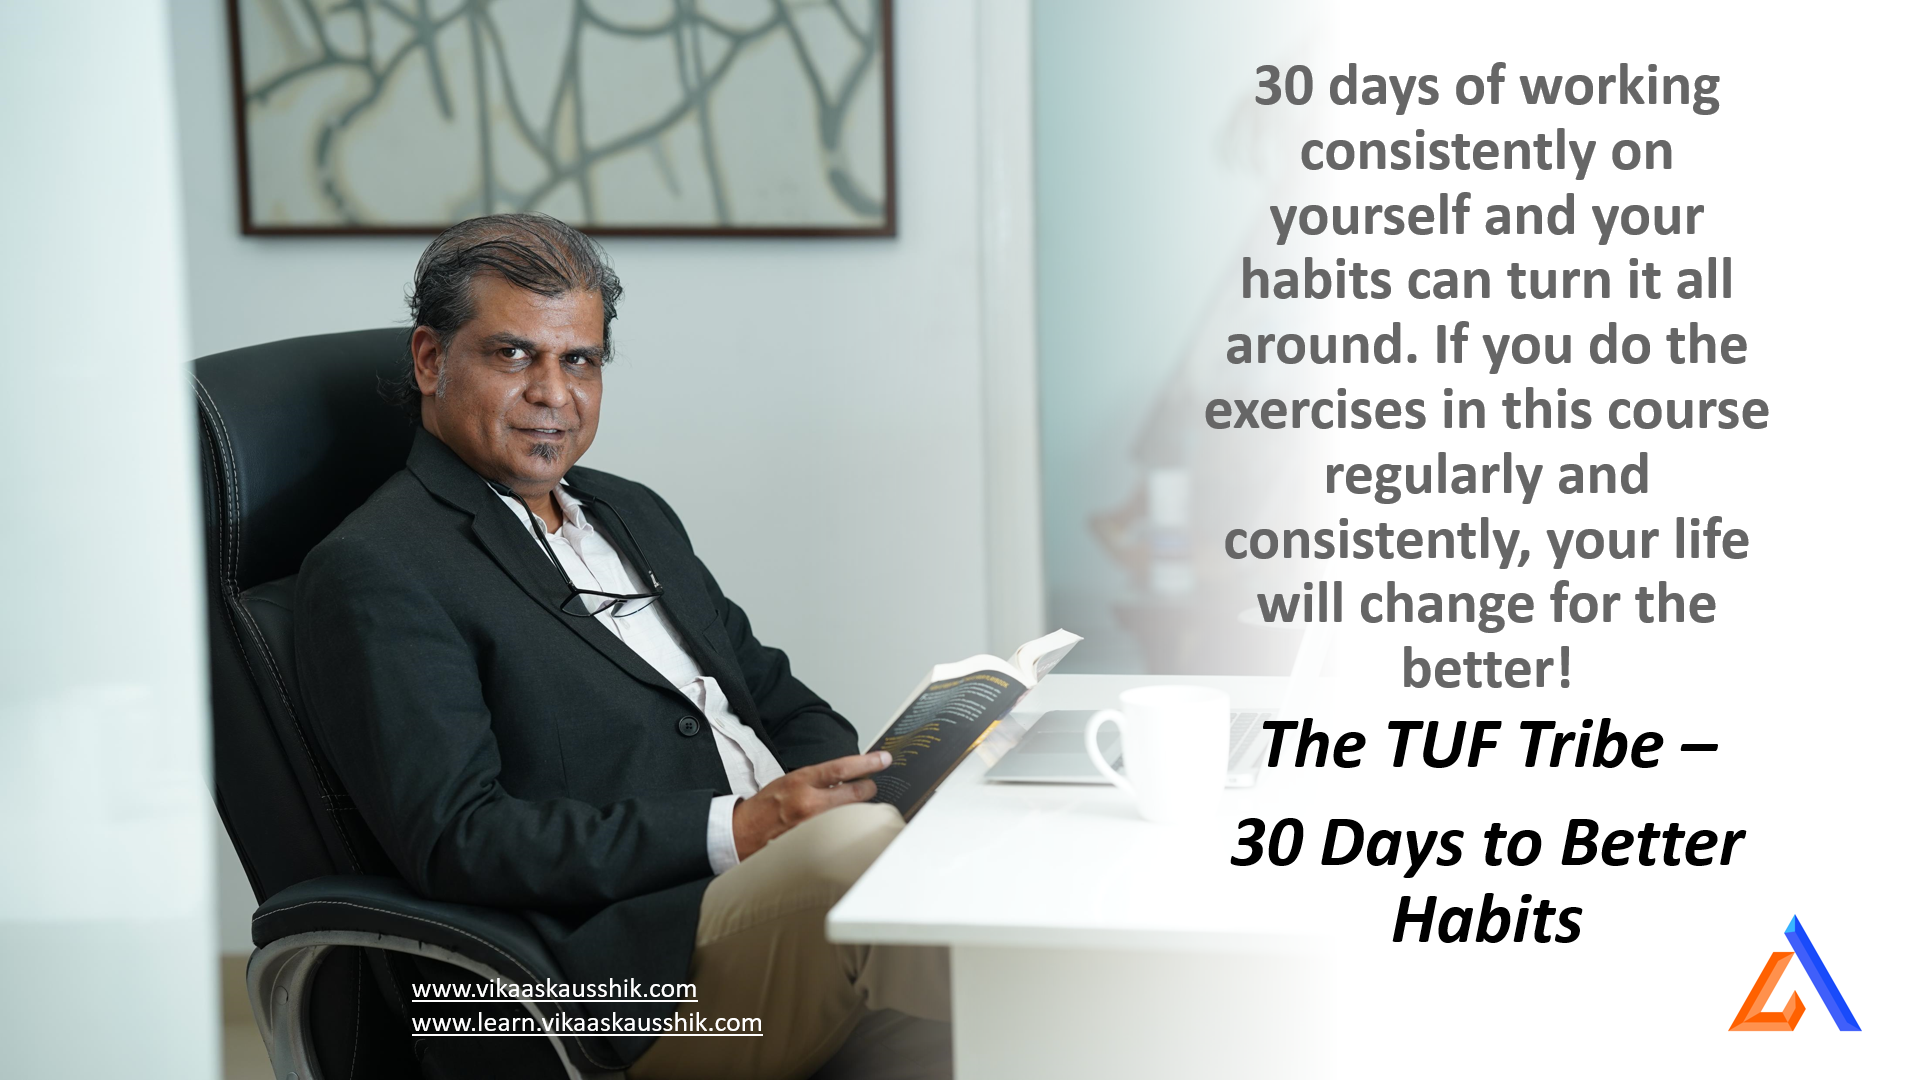 The TUF Tribe – 30 Days to Better Habits